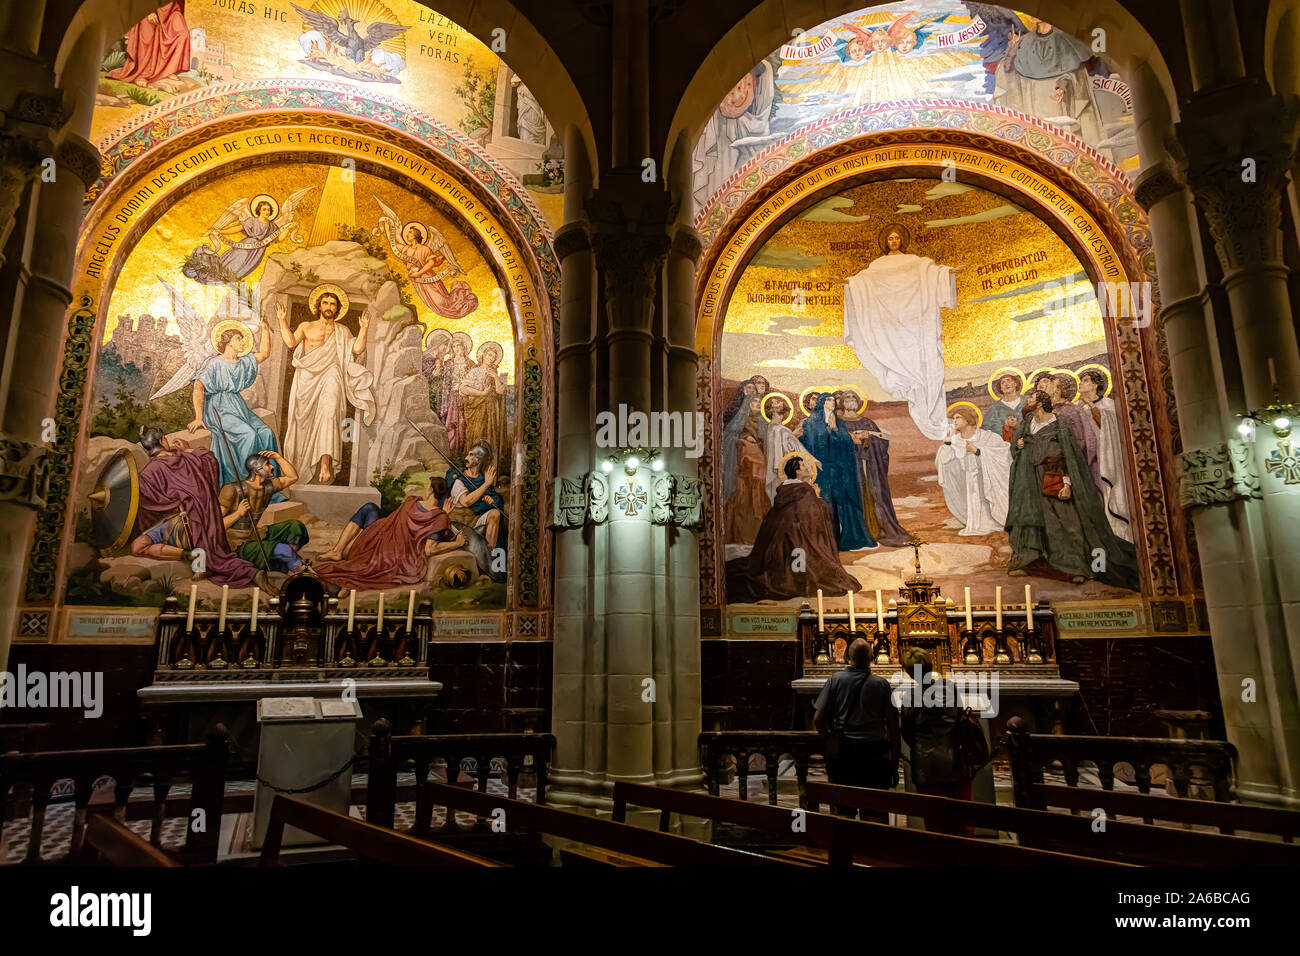 LOURDES, FRANCE - JUNE 15, 2019: Chapel inside the Rosary Basilica in Lourdes displaying Christian murals Stock Photo